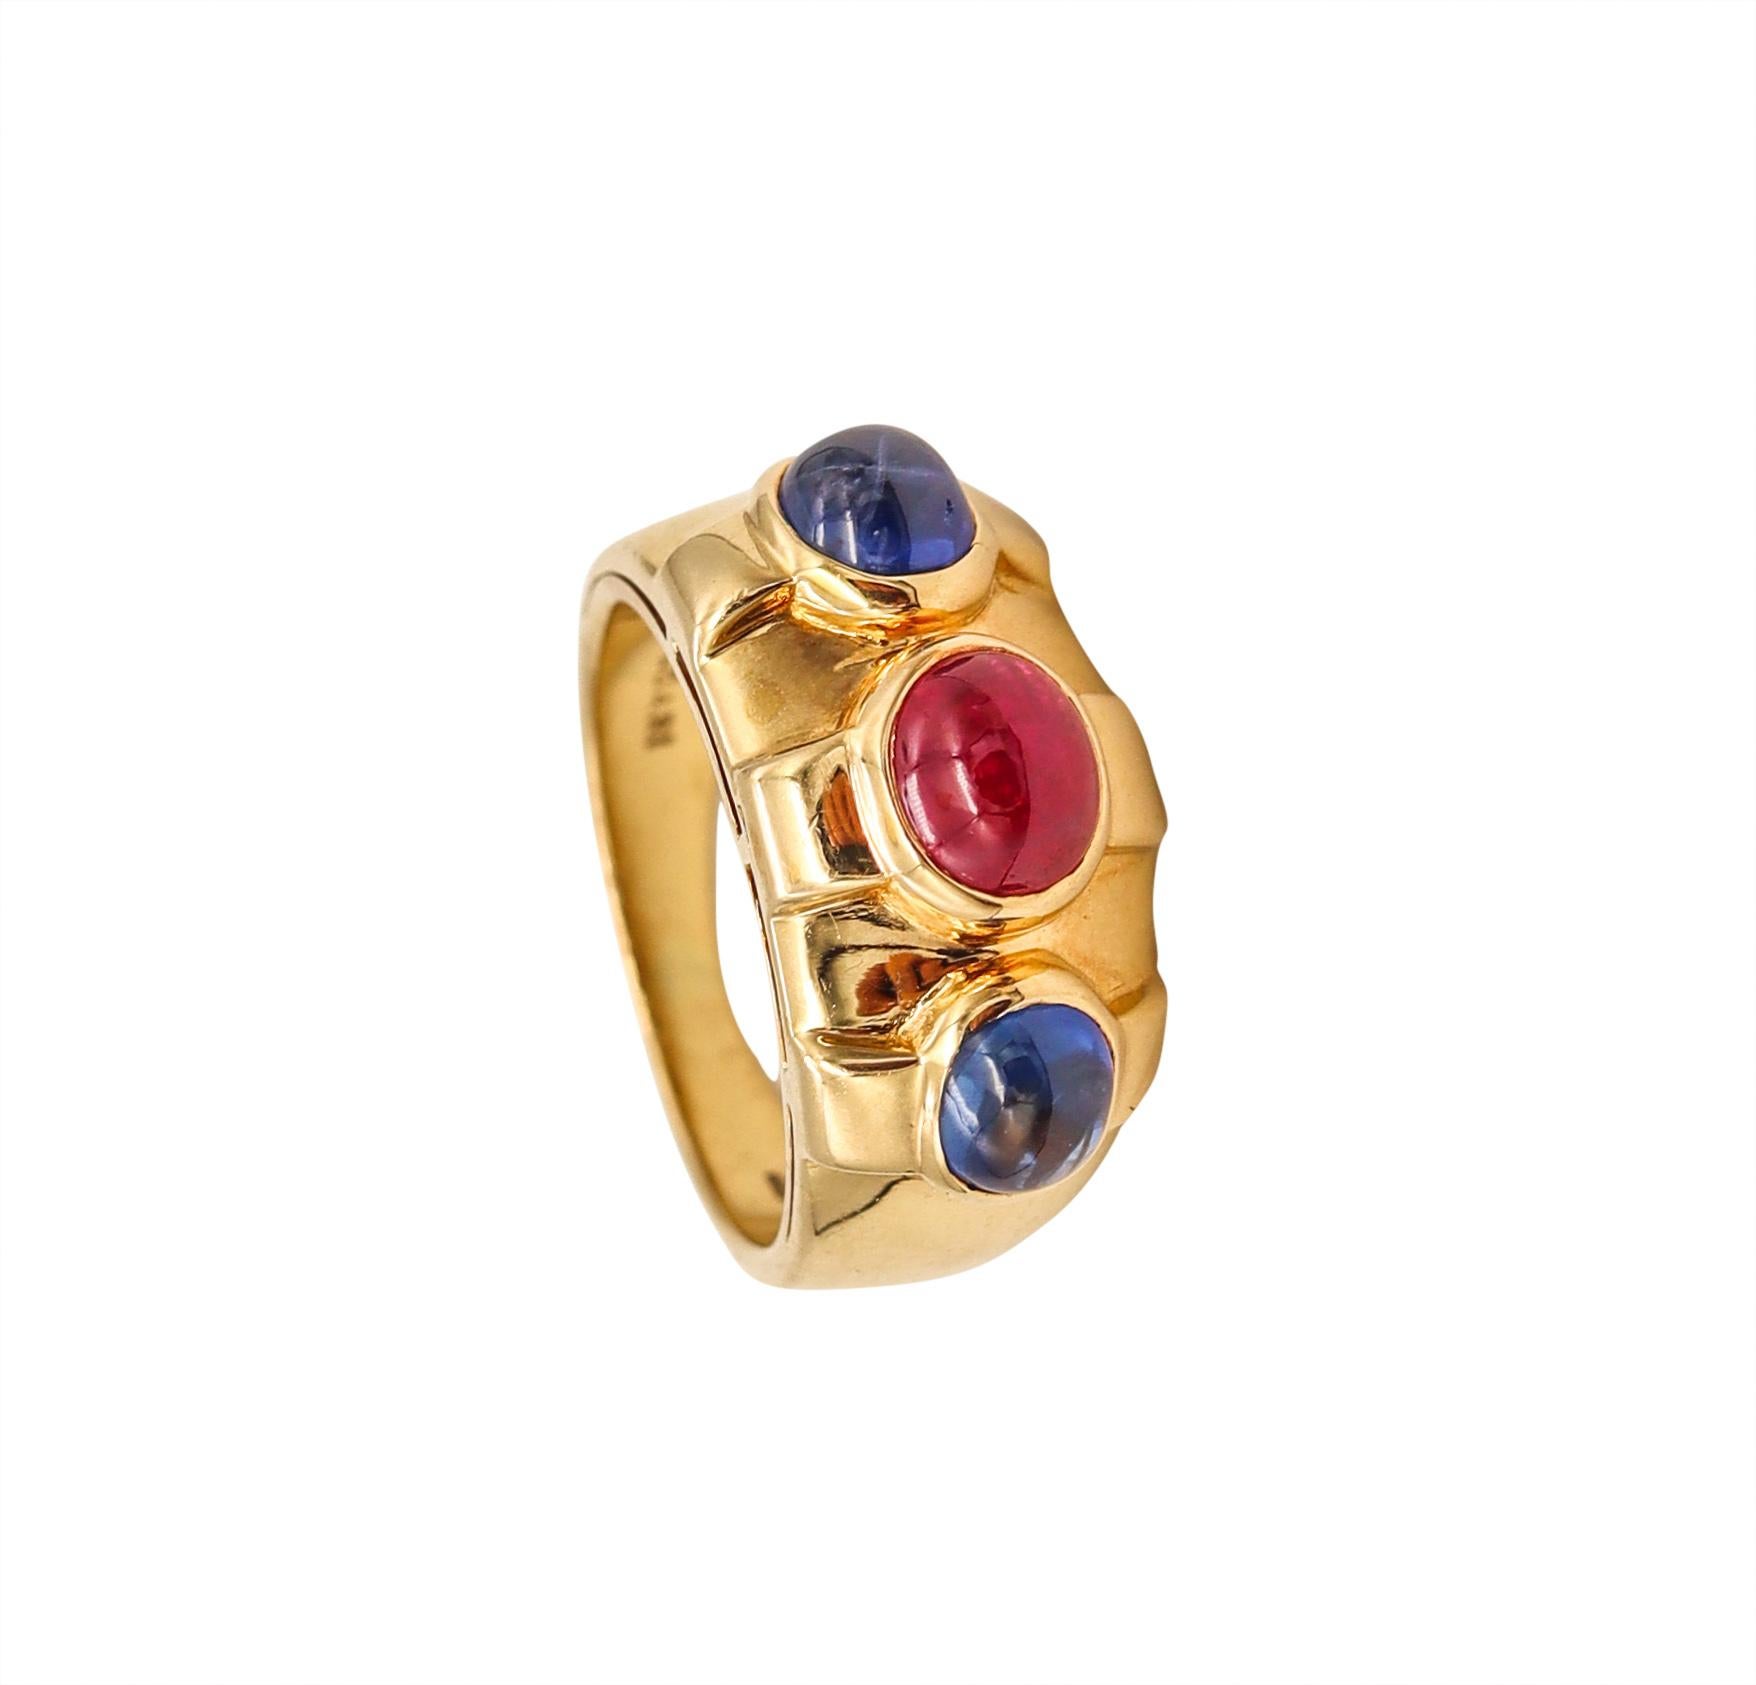 A gem-set ring designed by Bvlgari.

Beautiful vintage piece of jewelry, created in Rome, Italy by the iconic jewelry house of Bvlgari. This rare ring is part of the Bvlgari collection privee and was carefully crafted with great attention to details